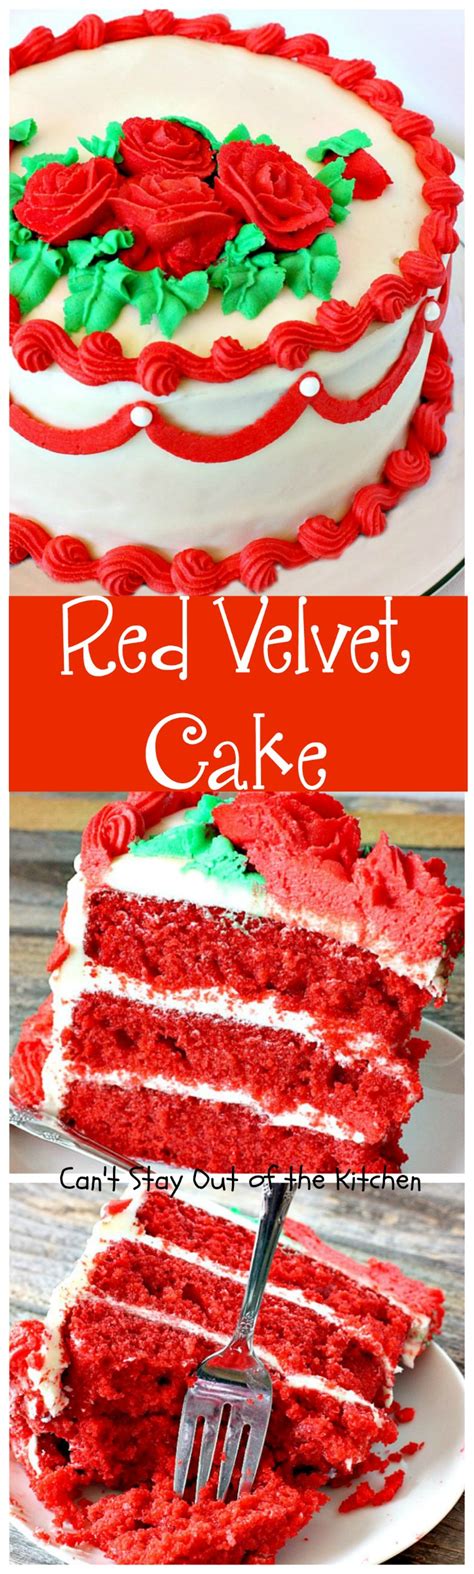 Then mix together the bicarbonate of soda and the cider vinegar and stir into the cake batter. Red Velvet Cake Collage - Can't Stay Out of the Kitchen